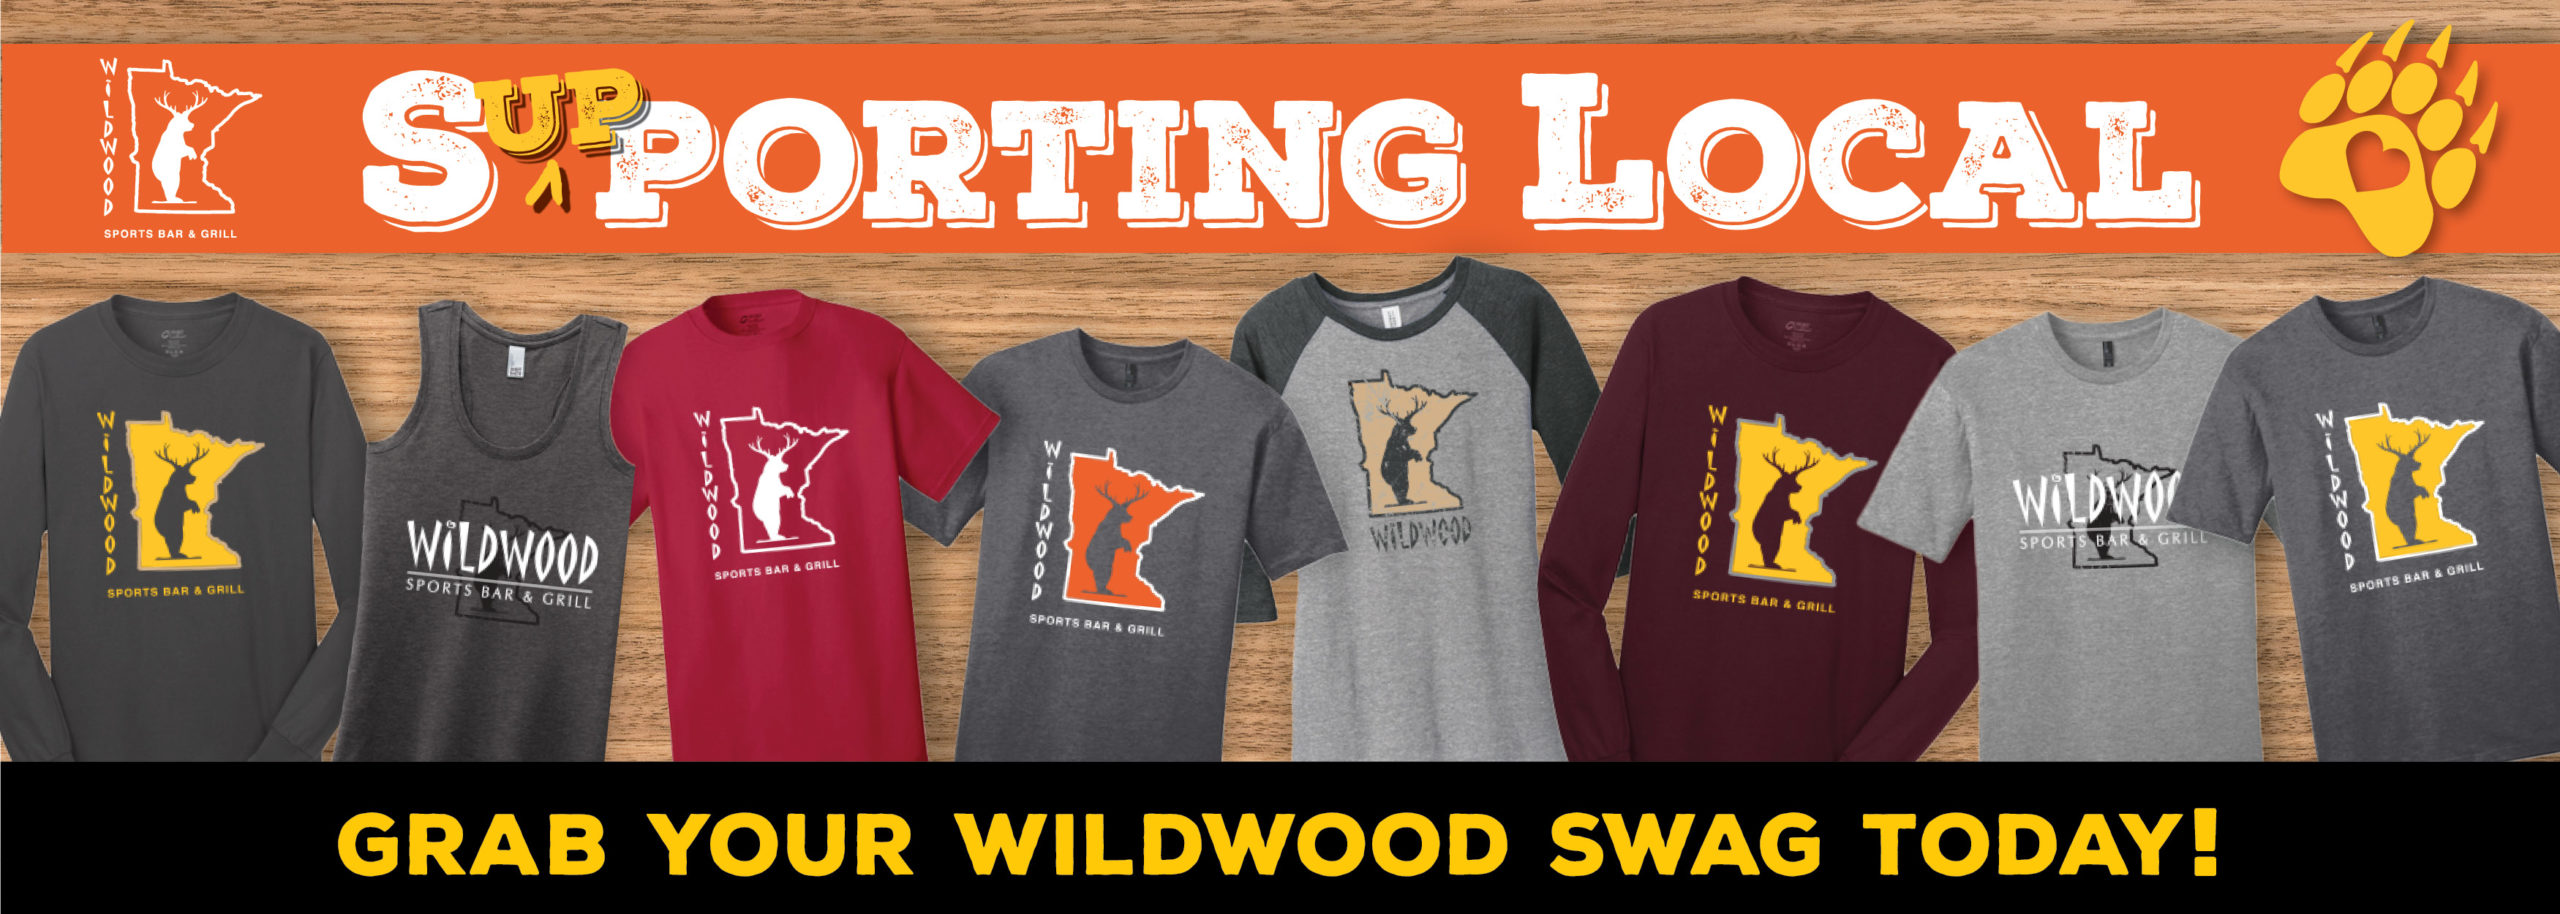 Wildwood Sports Bar & Grill Clothing